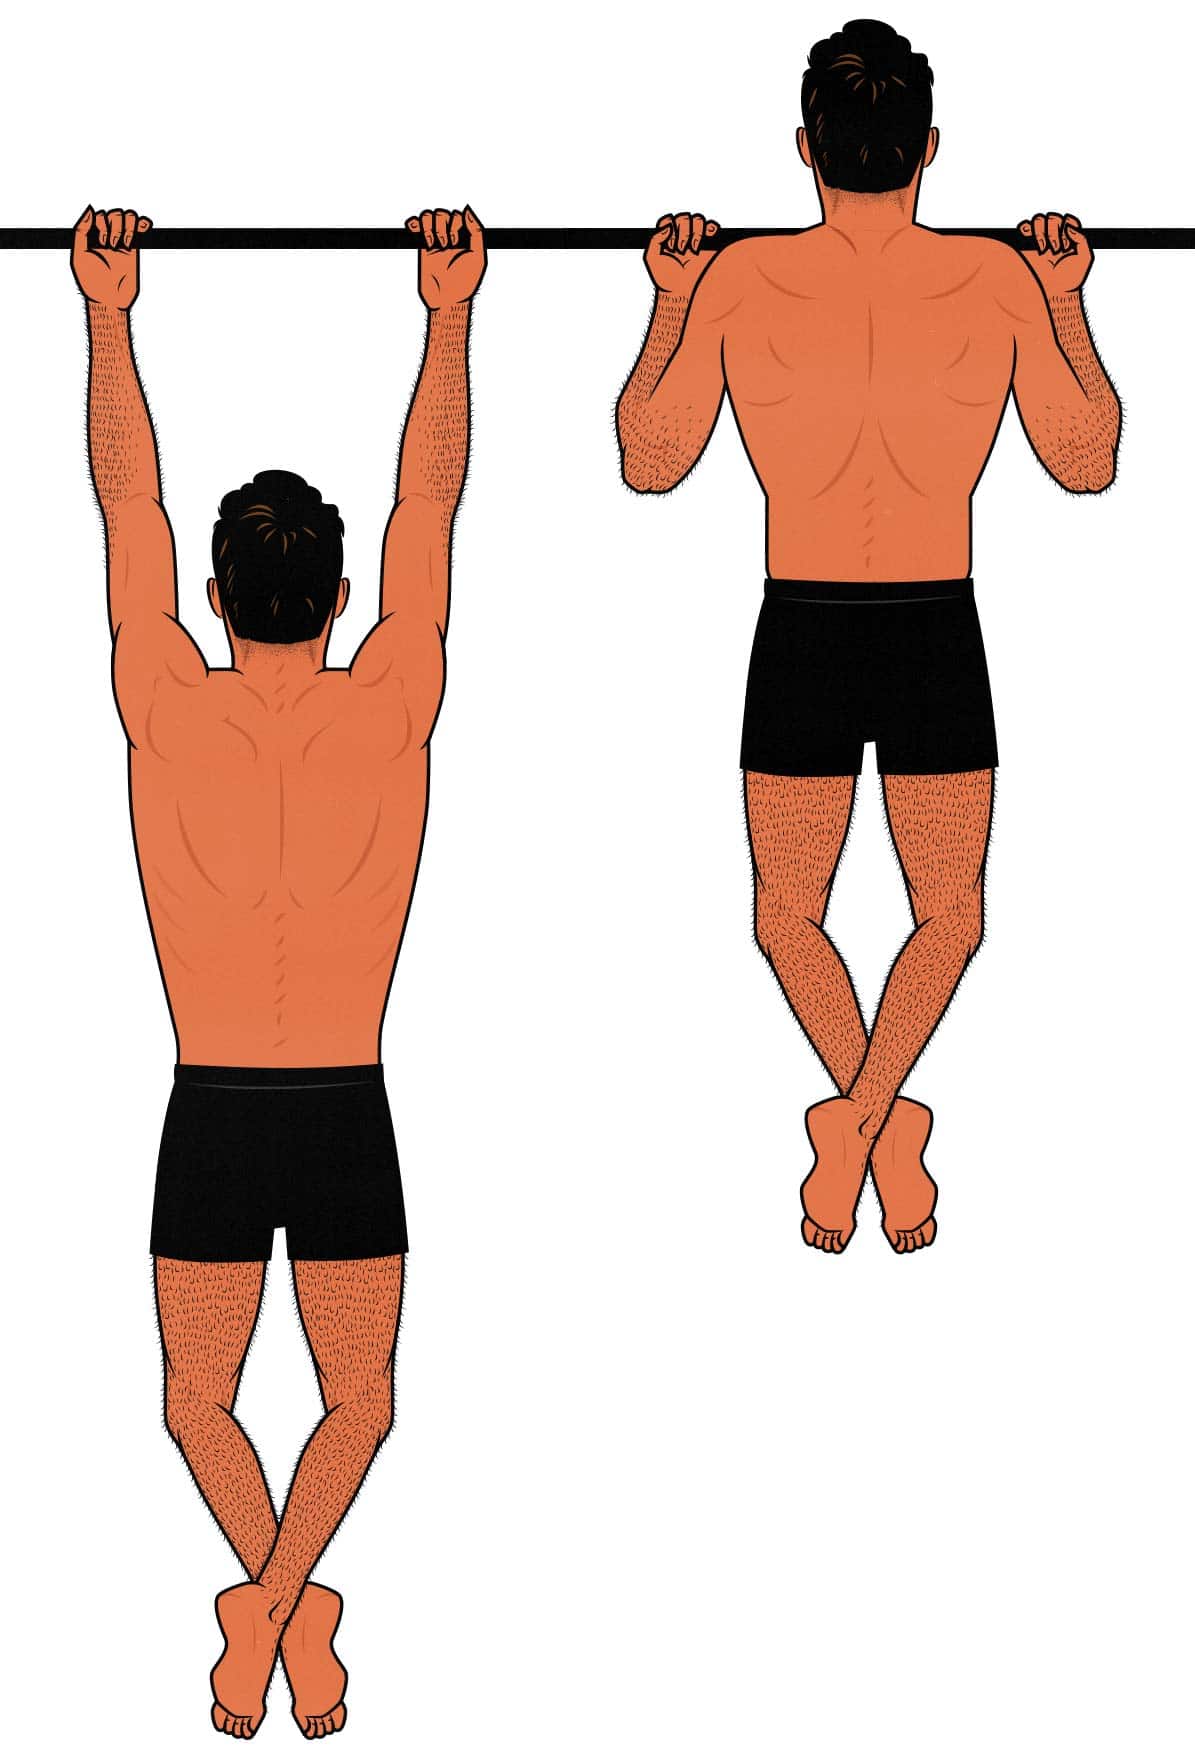 Illustration of a man doing a bodyweight chin-up through a full range of motion (dead hang and chest to bar).